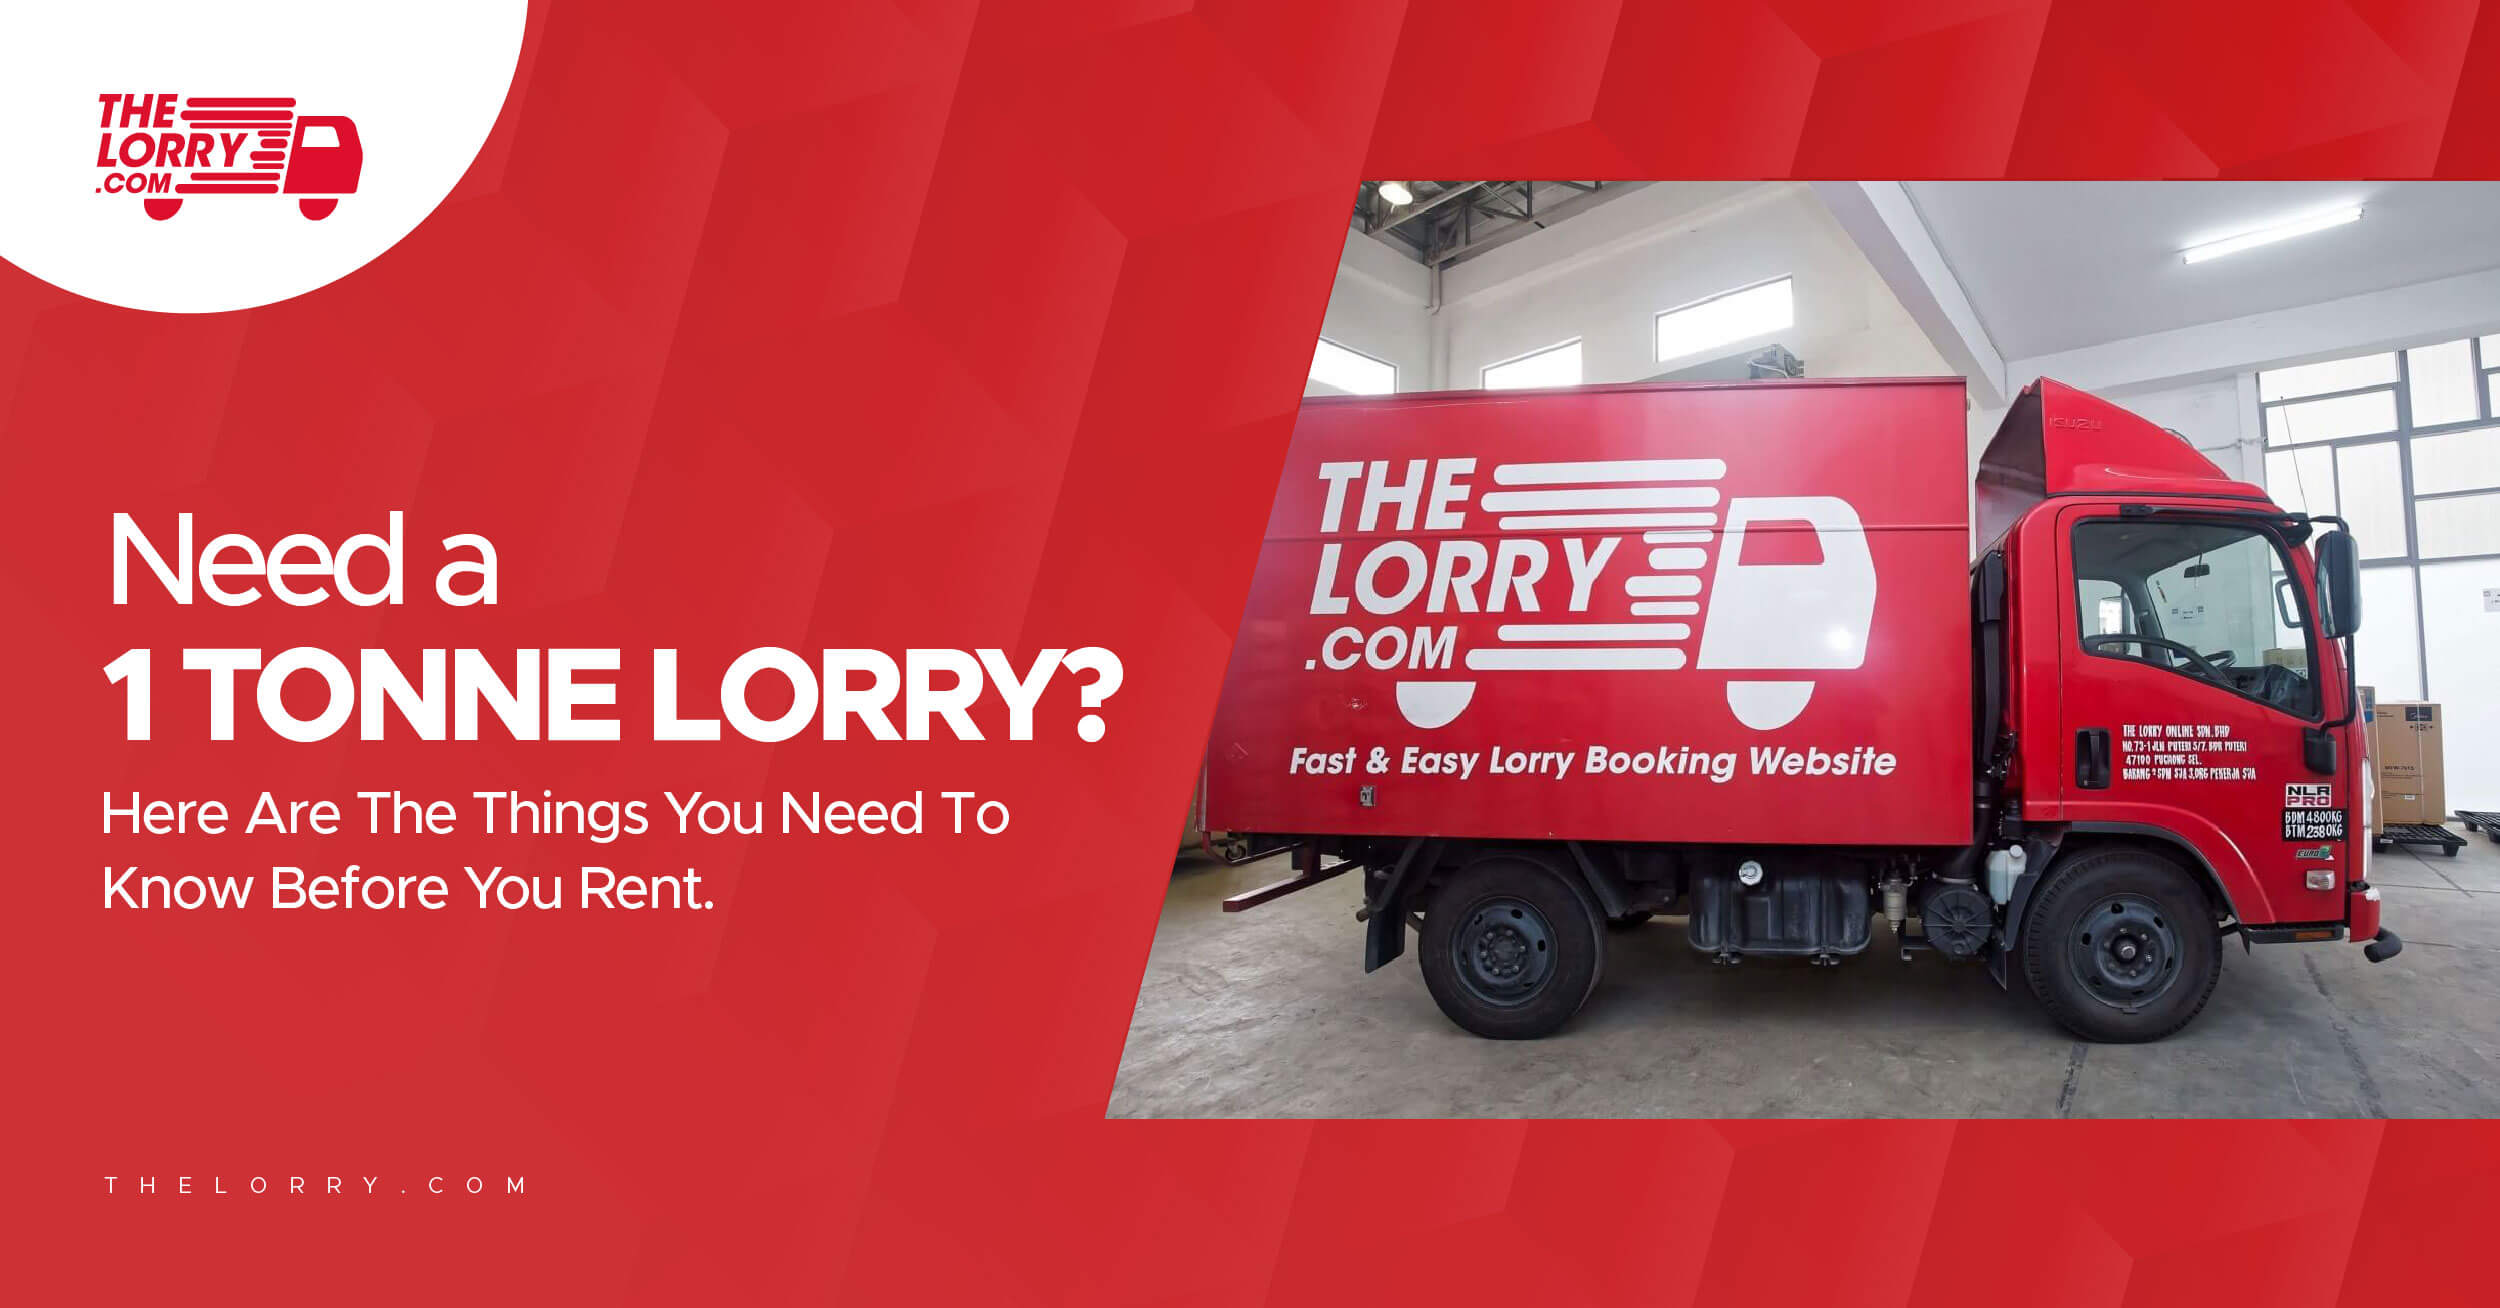 1 Tonne Lorry? The Things You Need To Know Before You Rent